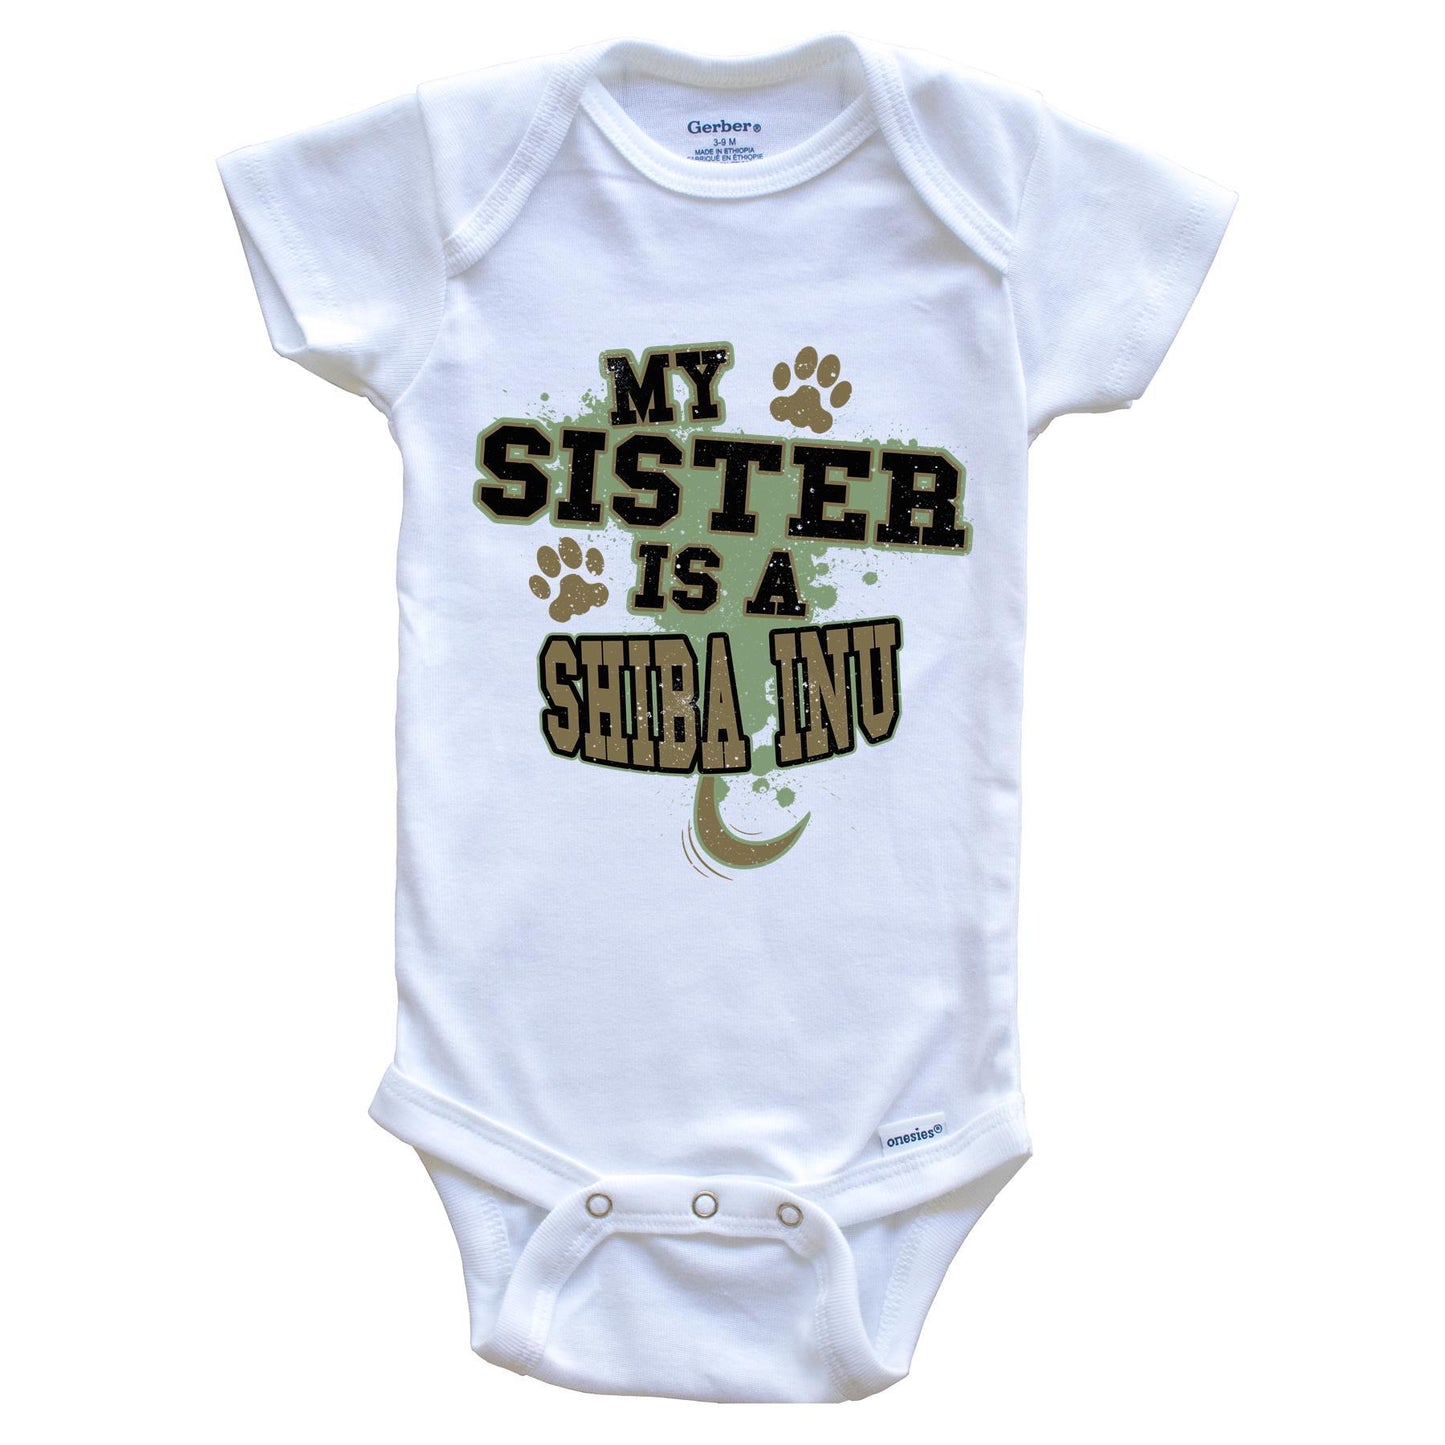 My Sister Is A Shiba Inu Funny Dog Baby Onesie